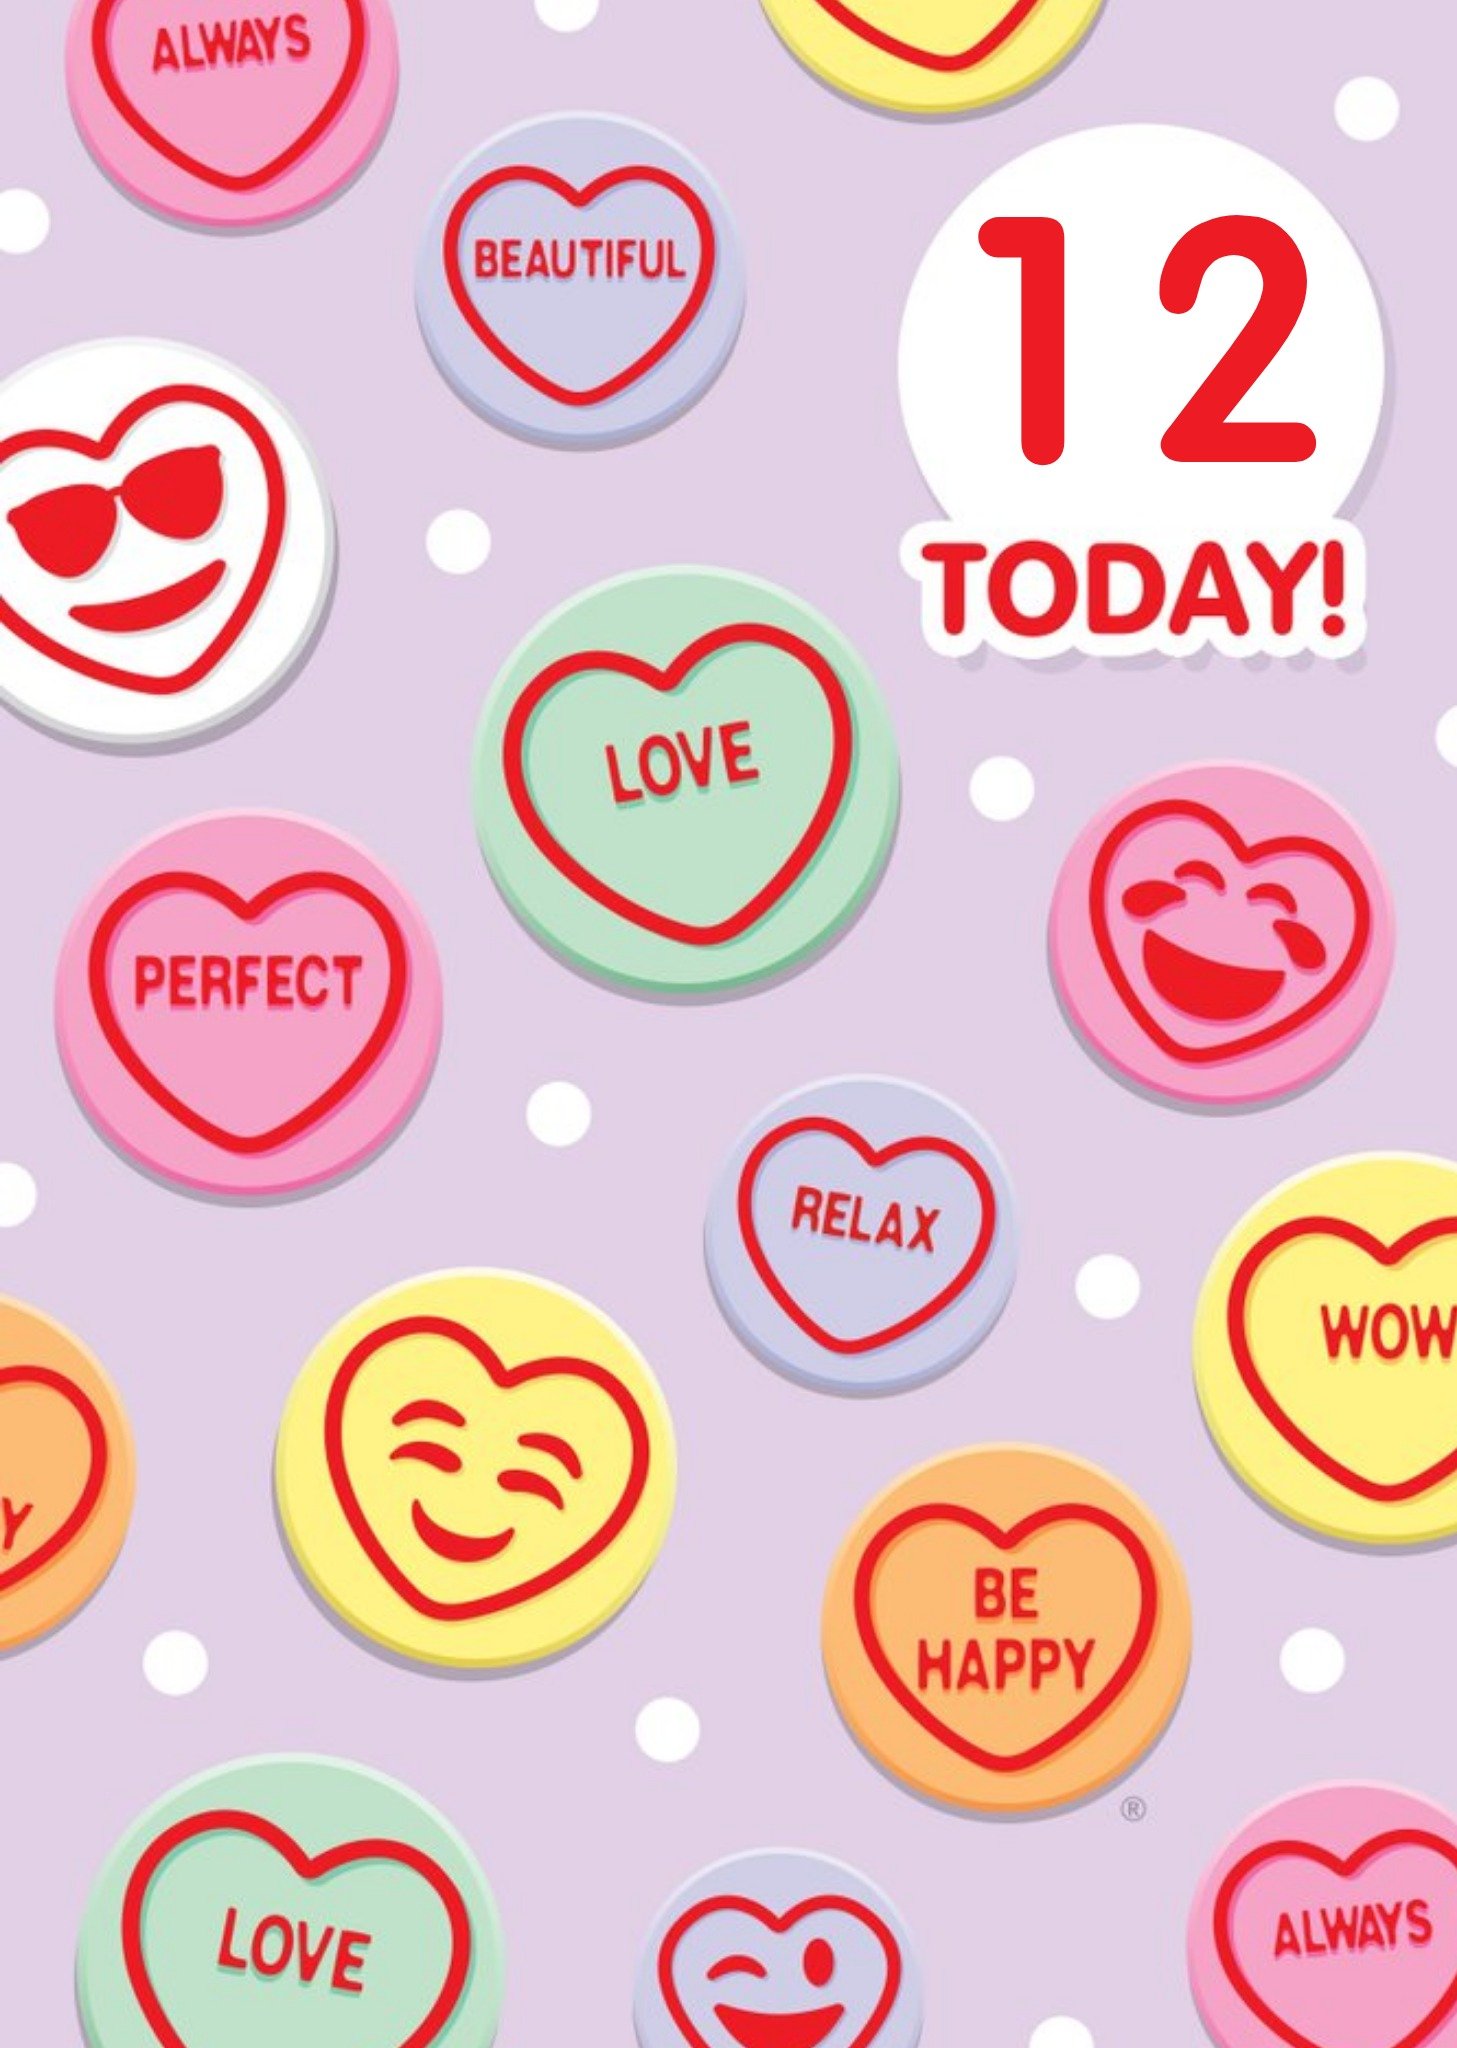 Swizzels Love Hearts 12 Today Birthday Card, Large